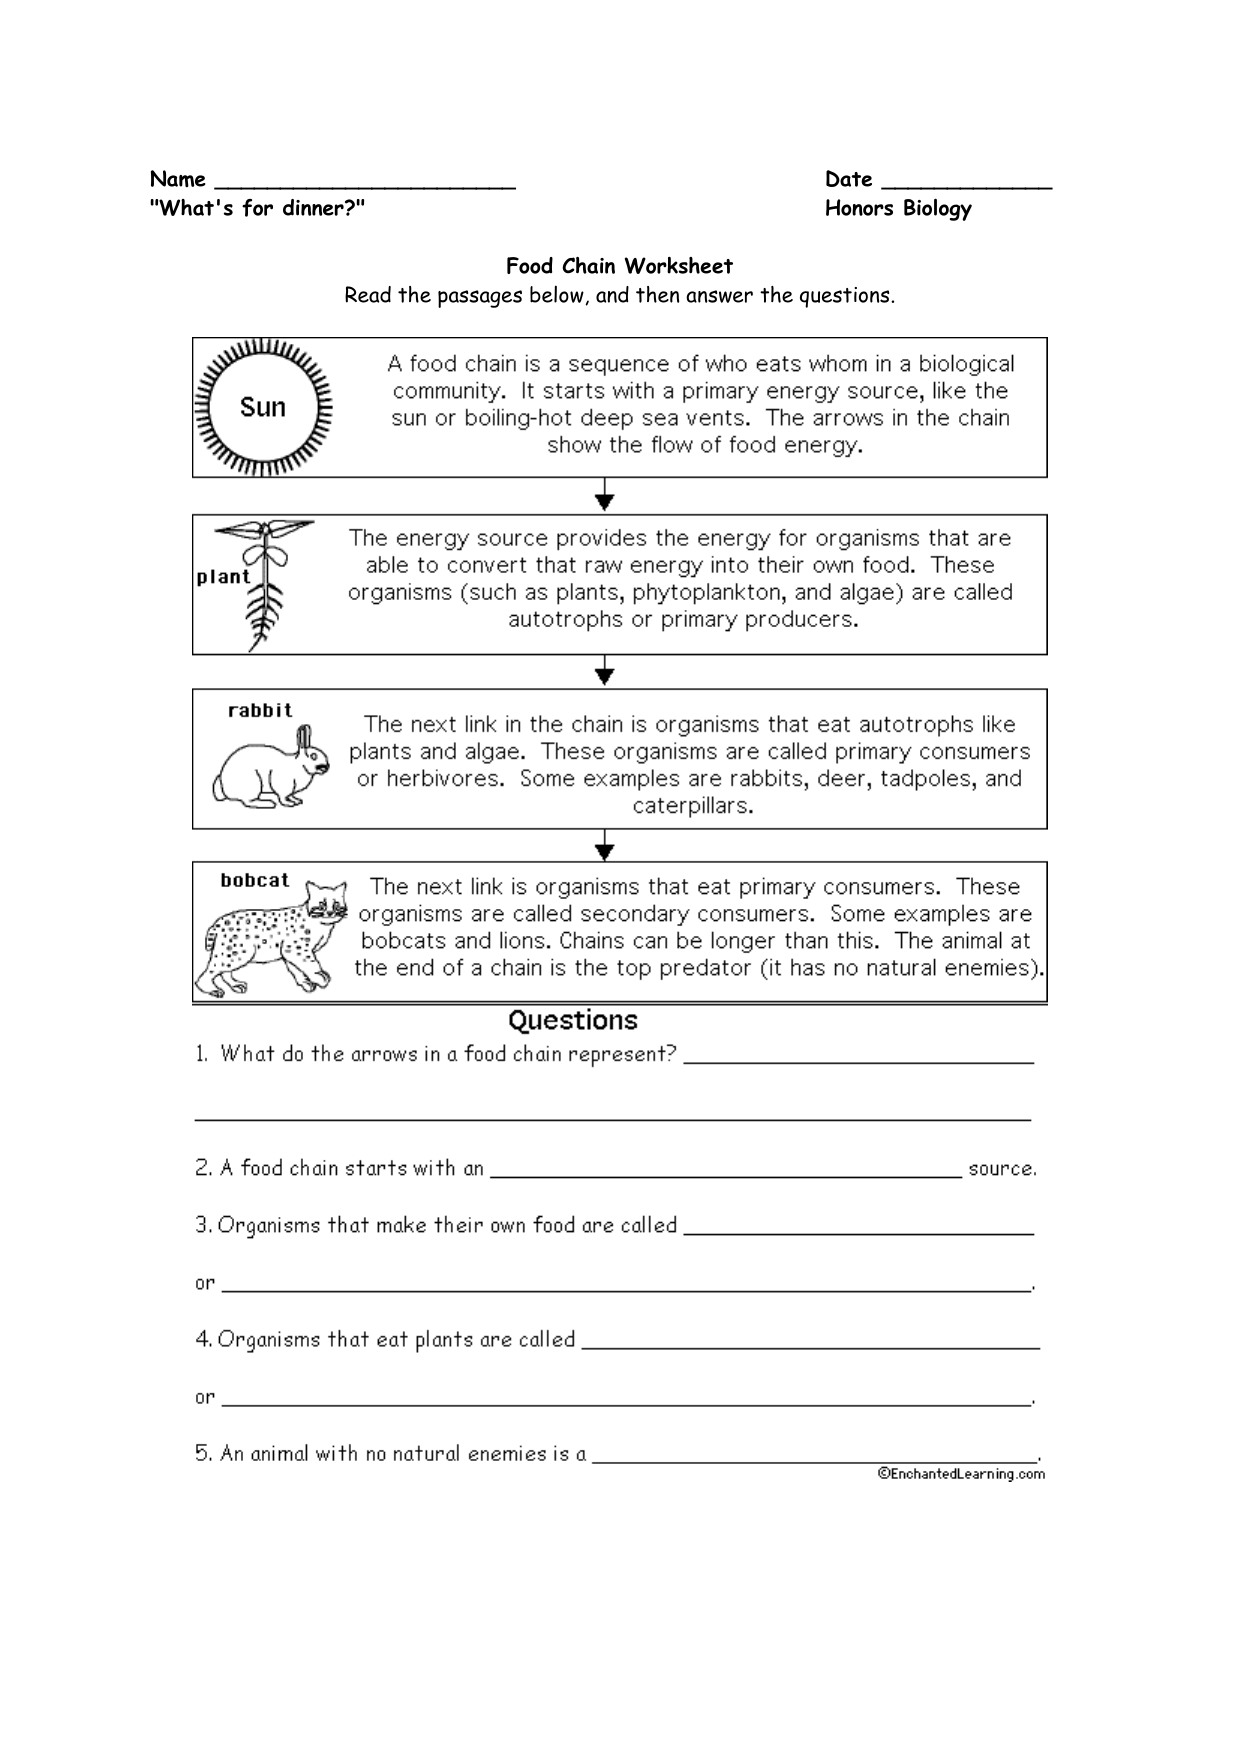 Food Chain and Food web Worksheets With Food Web Worksheet Answers